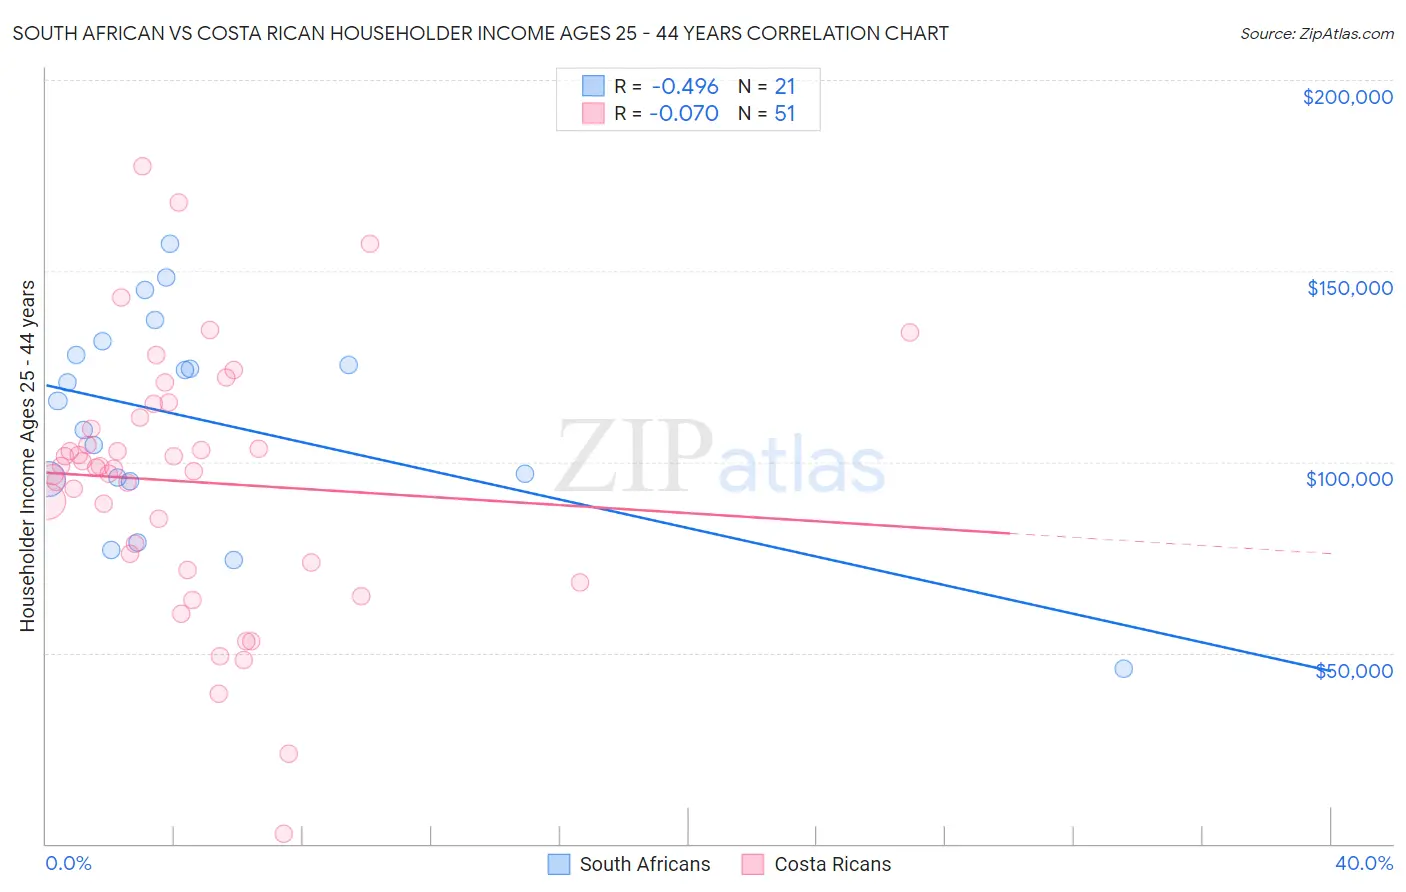 South African vs Costa Rican Householder Income Ages 25 - 44 years